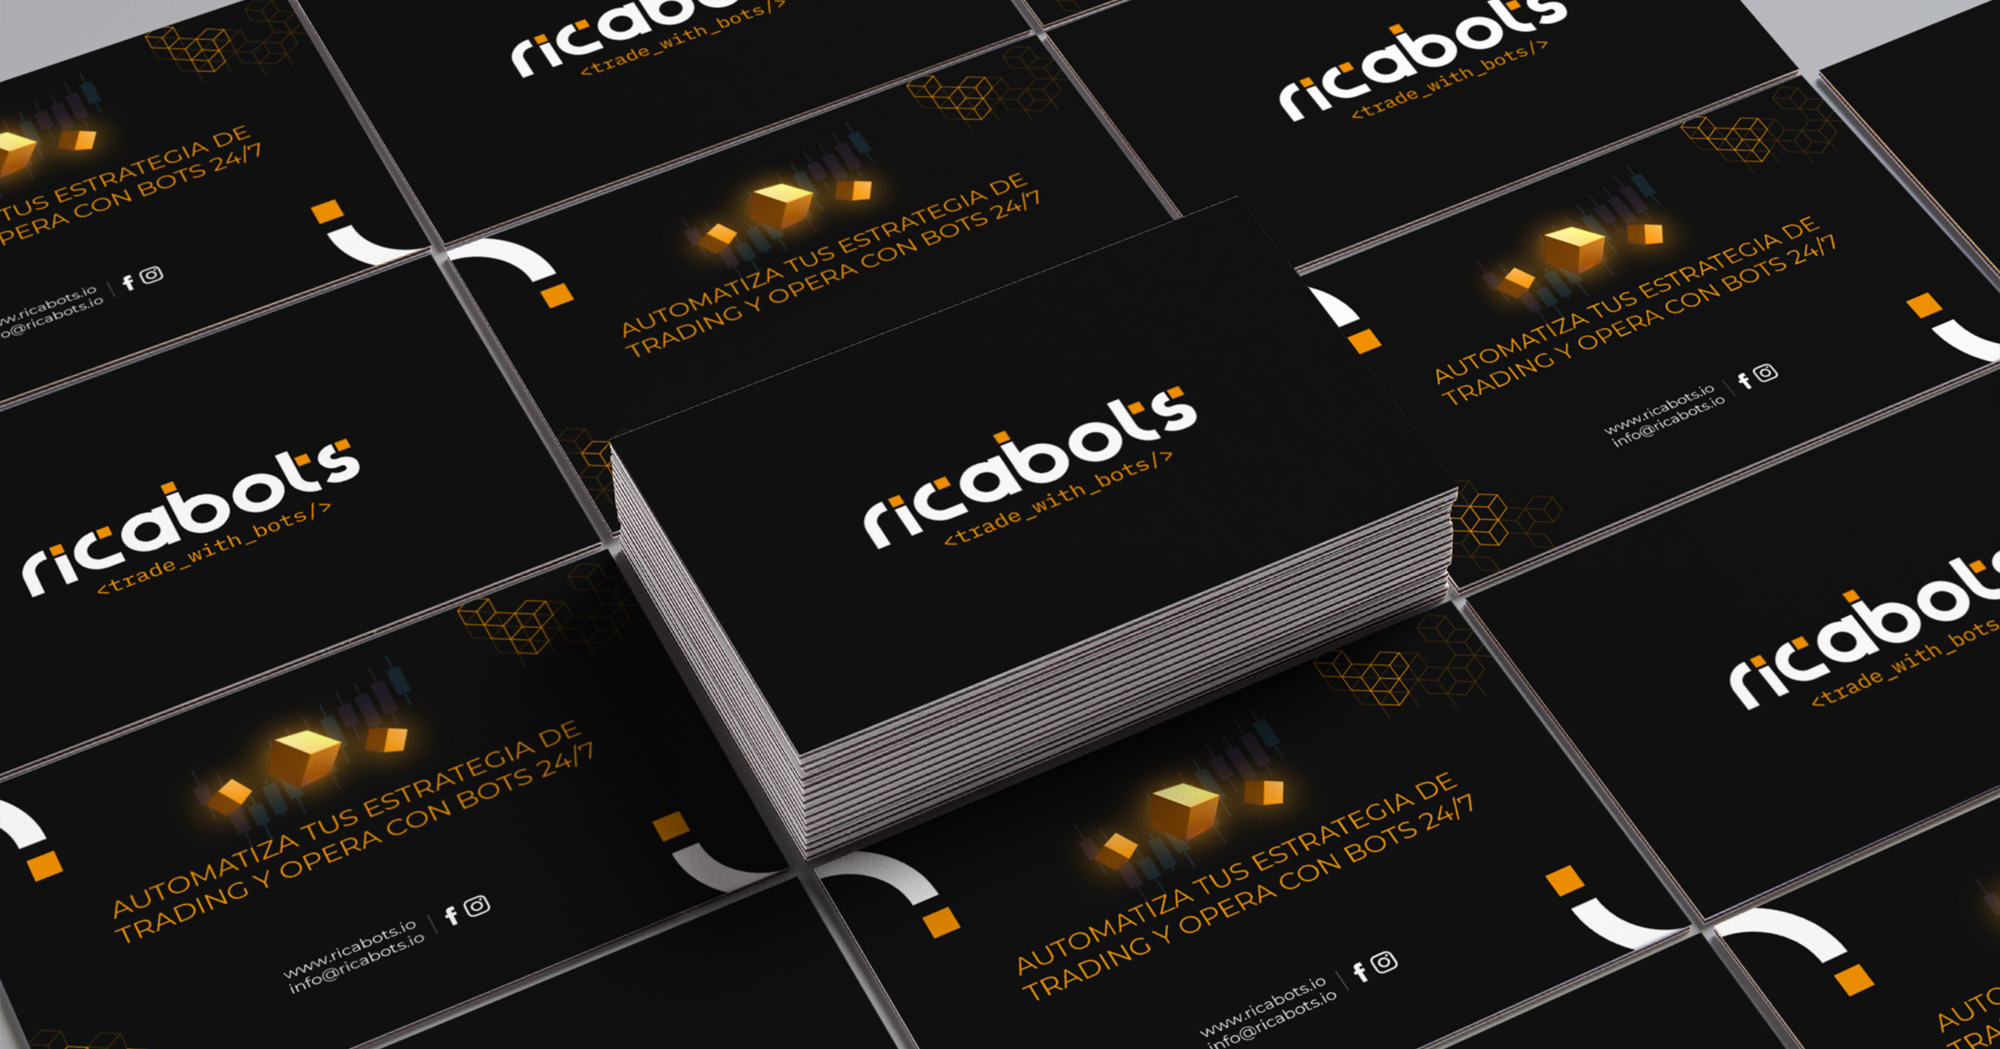 Ricabots - Cards